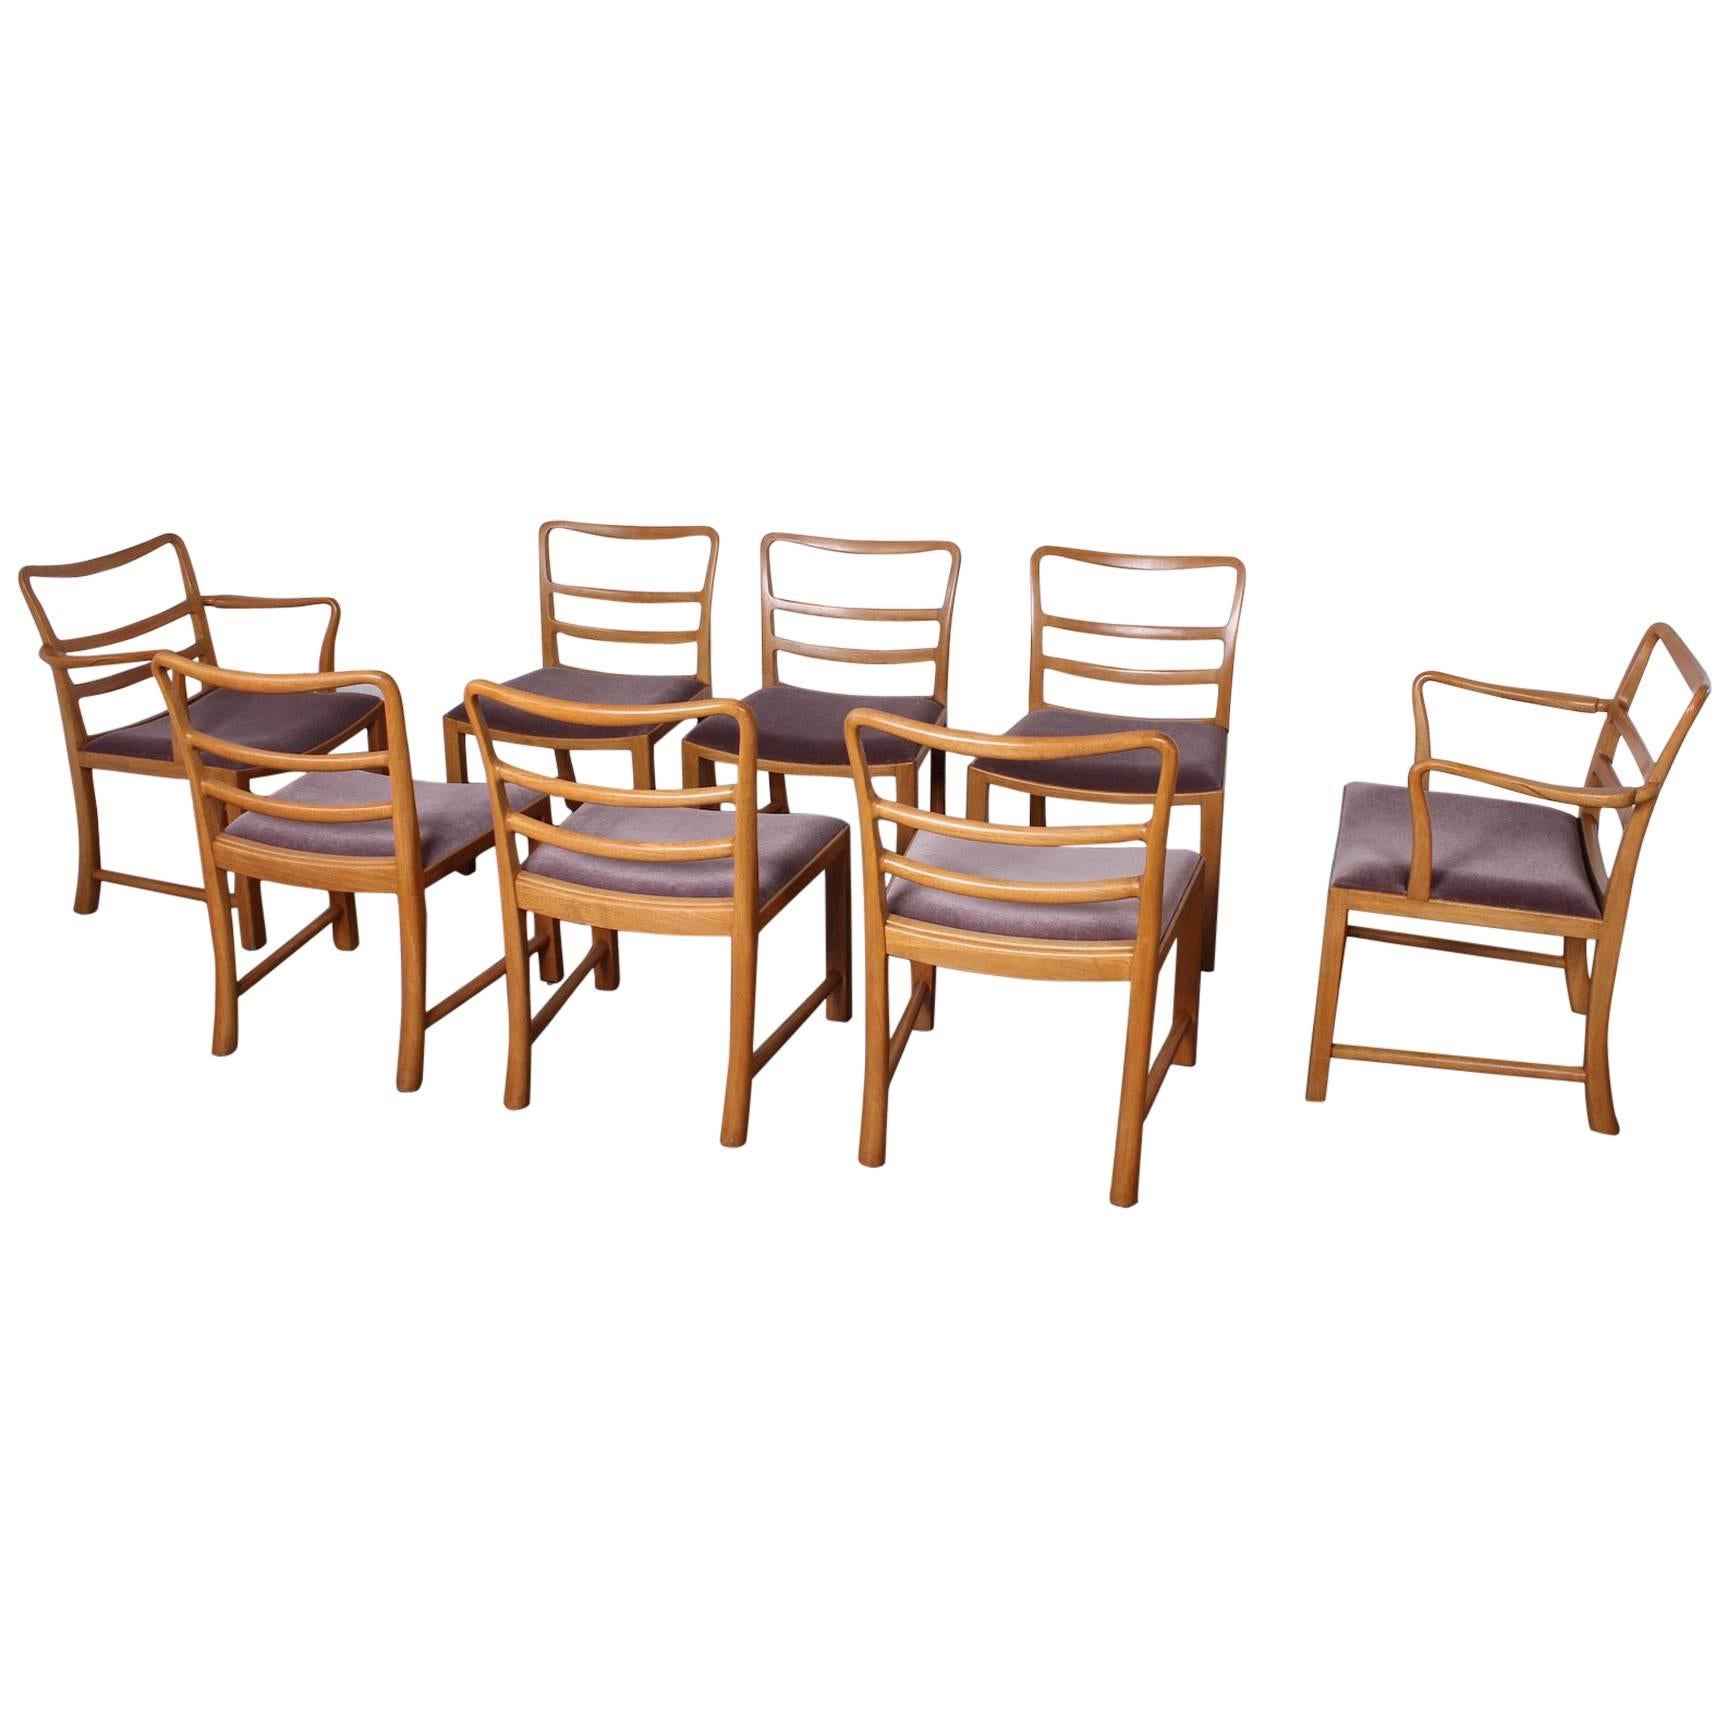 Set of Eight Dining Chairs by Edward Wormley for Dunbar